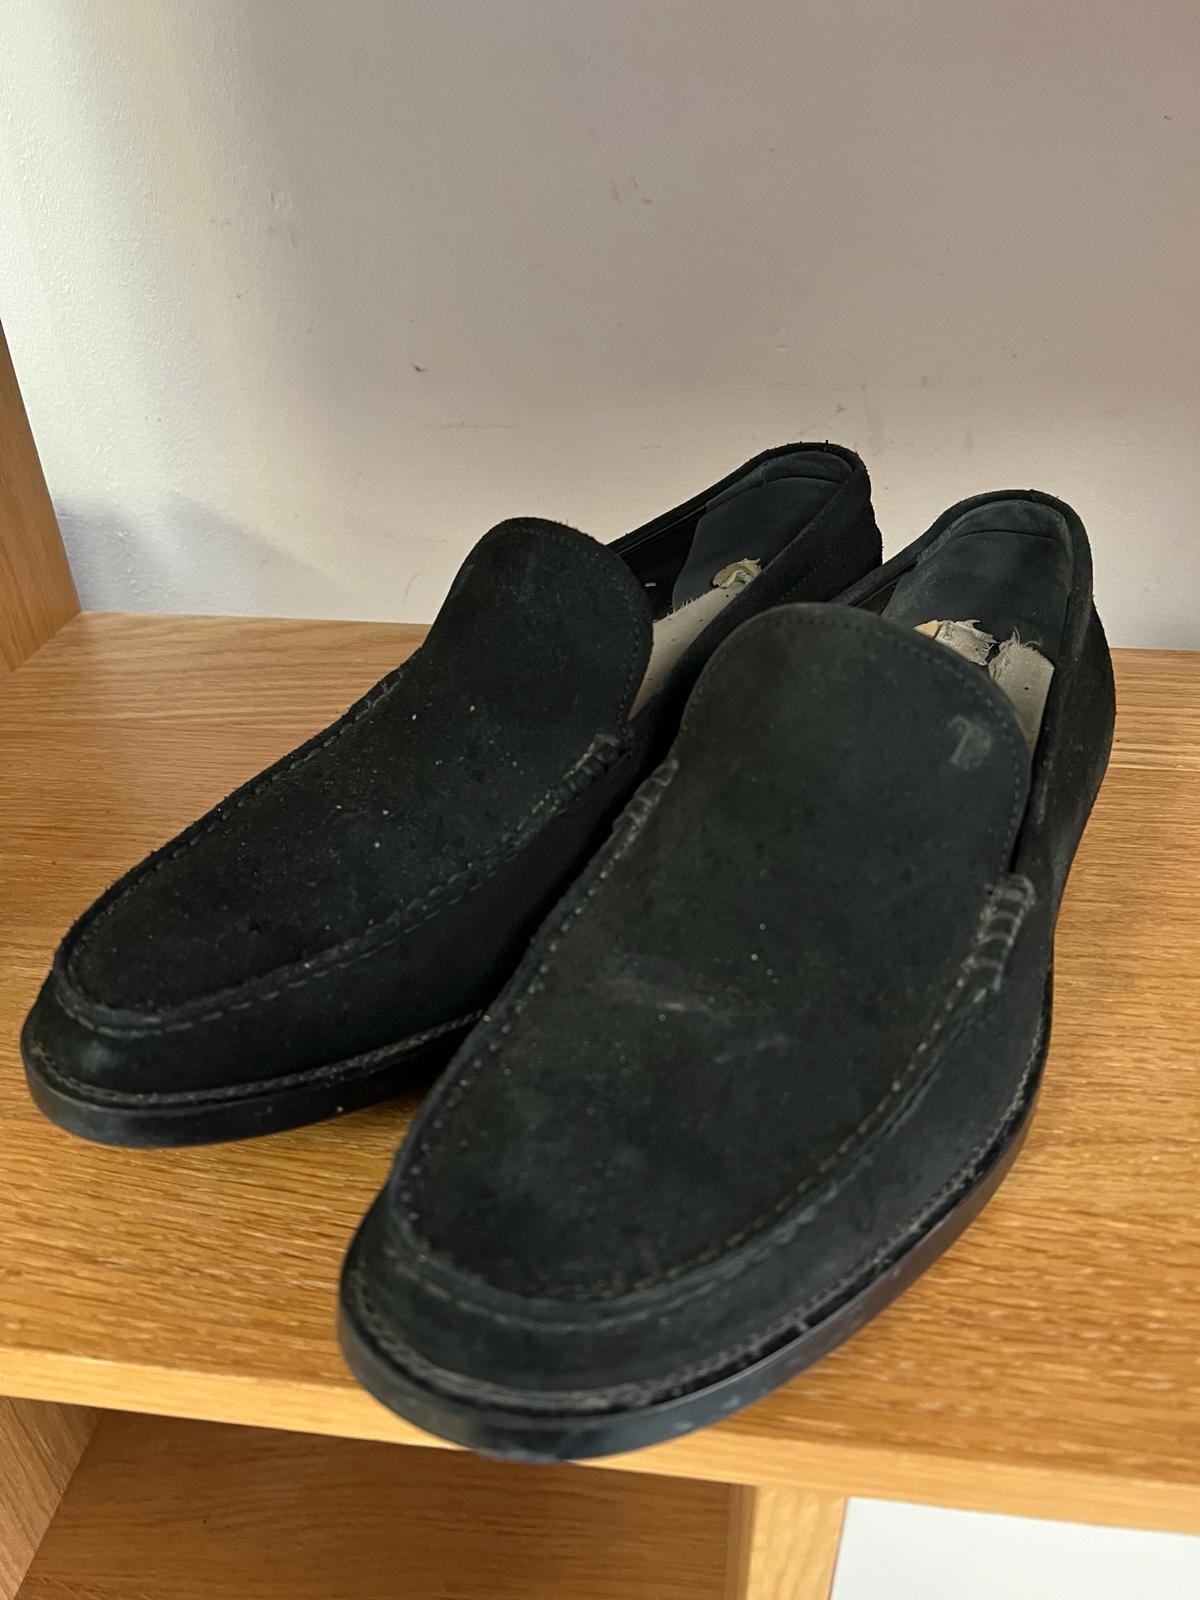 Four pairs of Todd's black shoes, men size 9 and 8.5 - Image 3 of 12